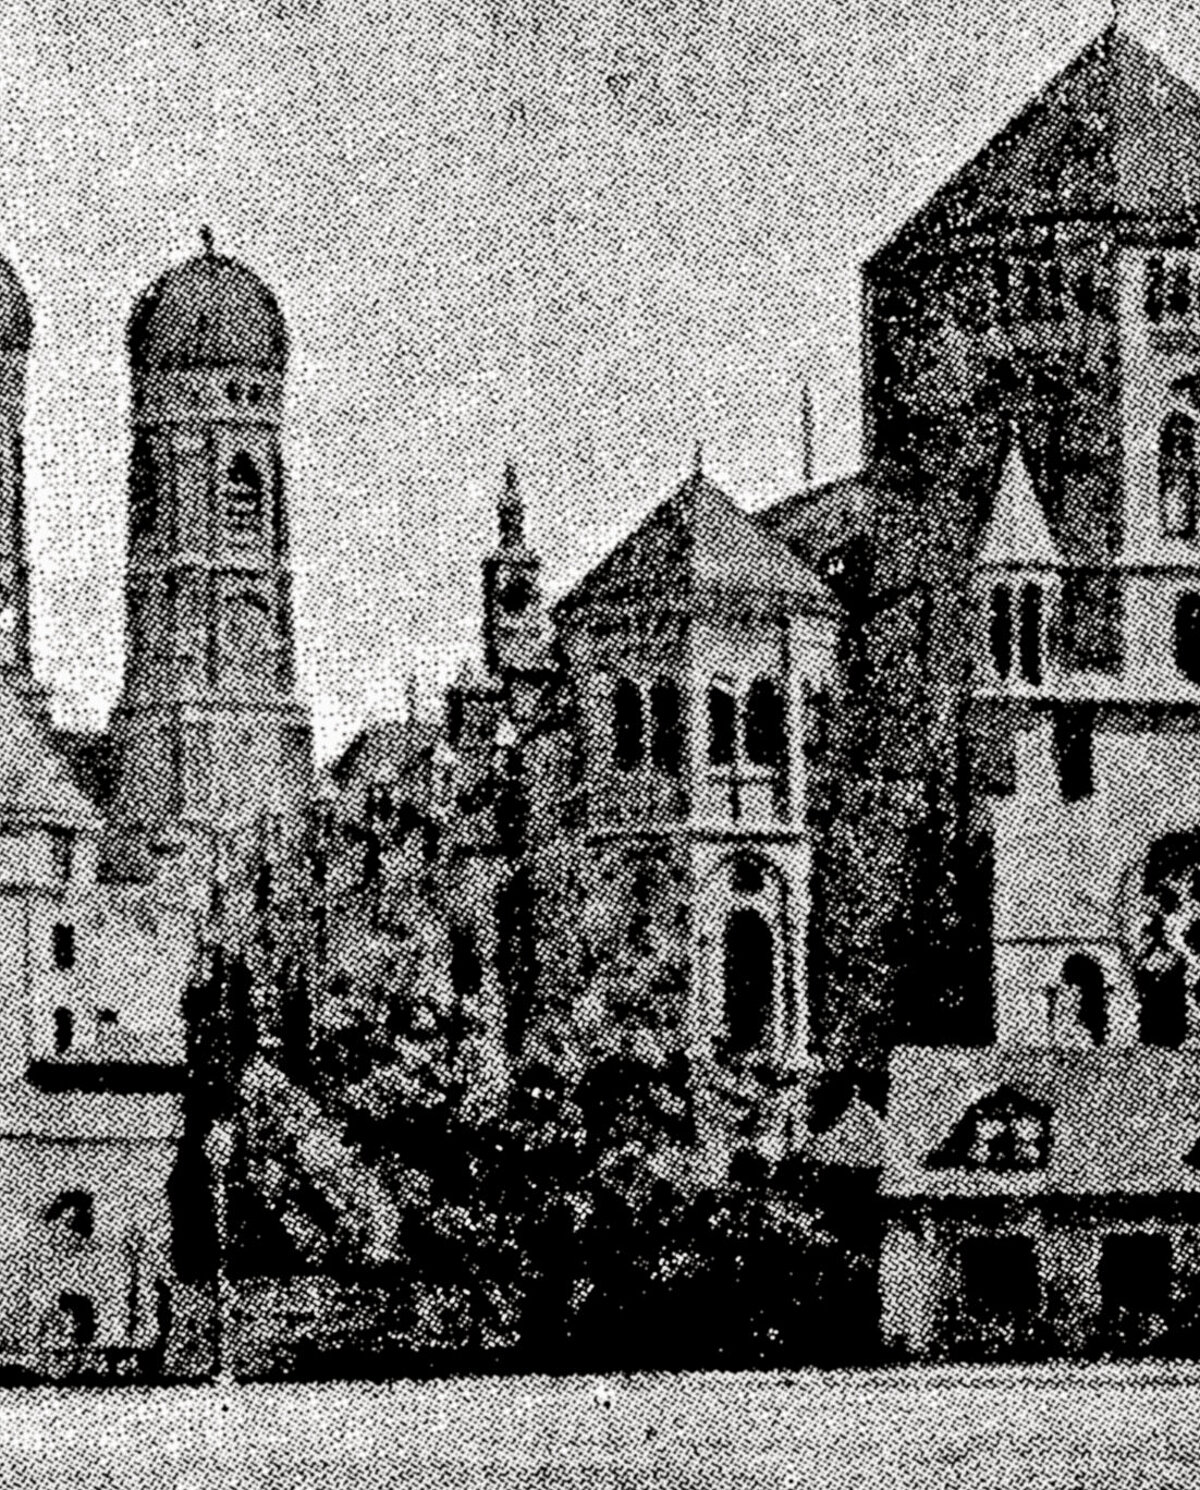 The main synagogue in Munich on the eve of destruction; on the left in the background, the Chruch of Our Lady, the symbol of Munich, June 1938 